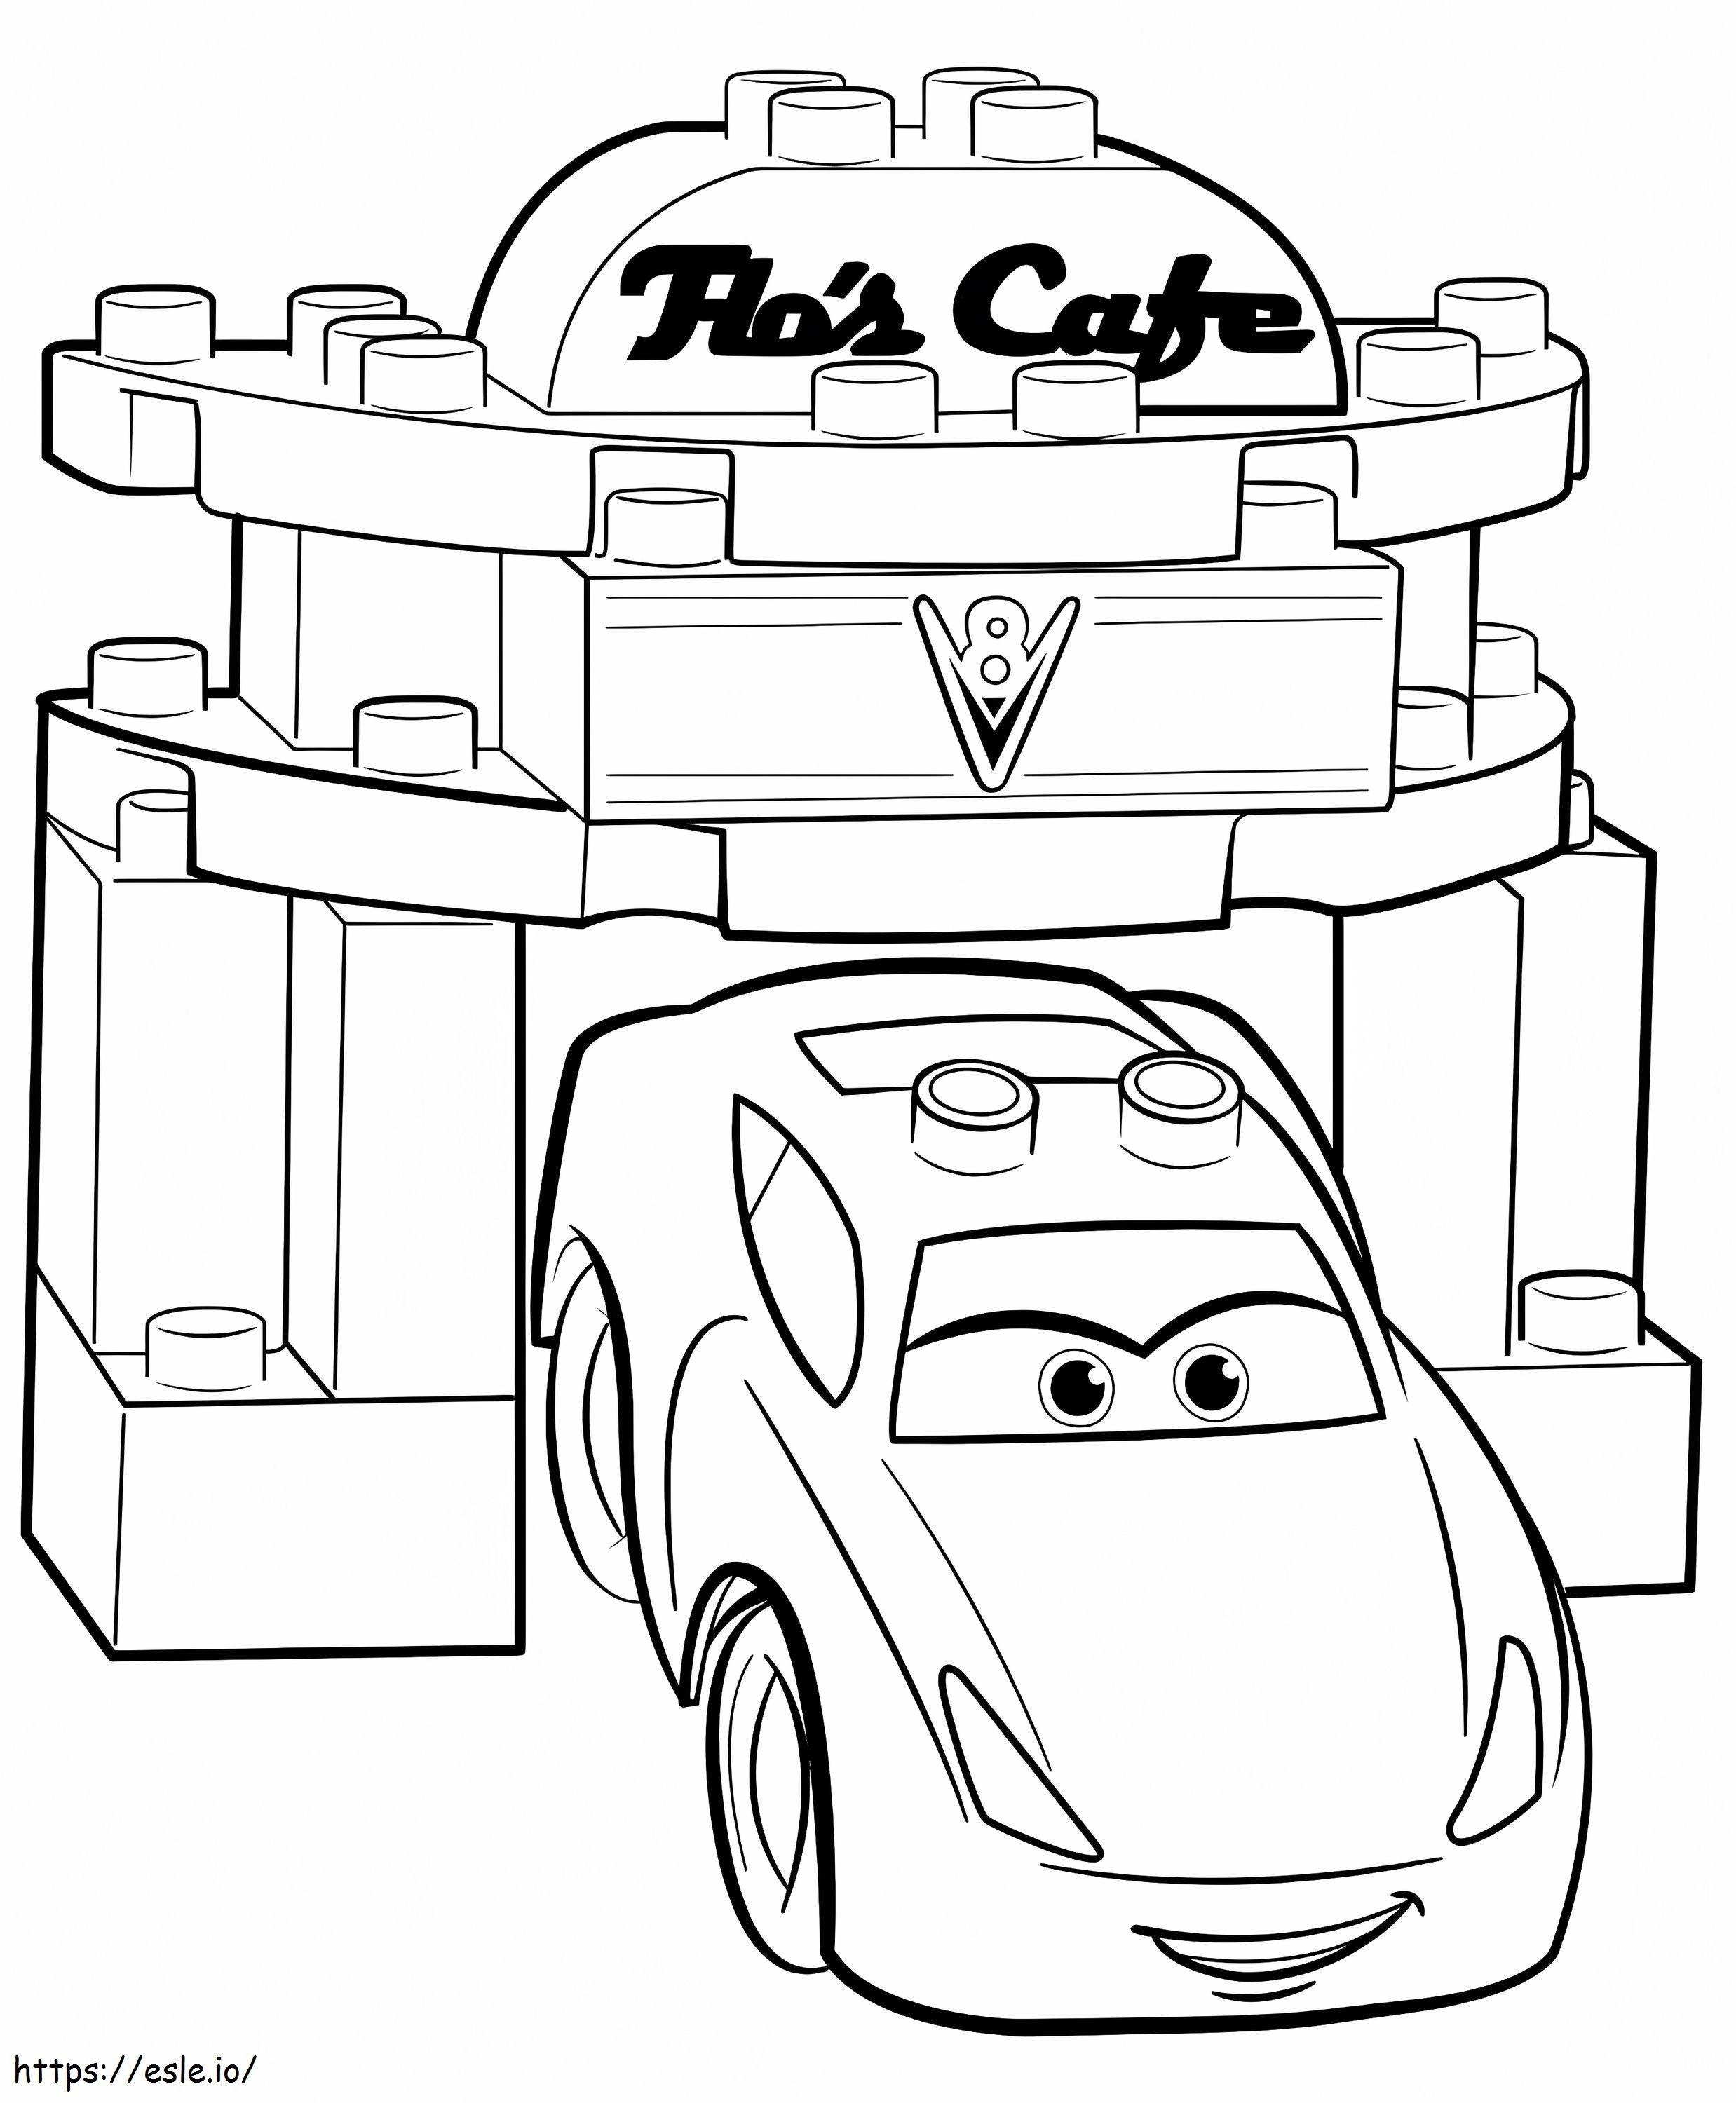 Cars 3 Lego Duplo coloring page